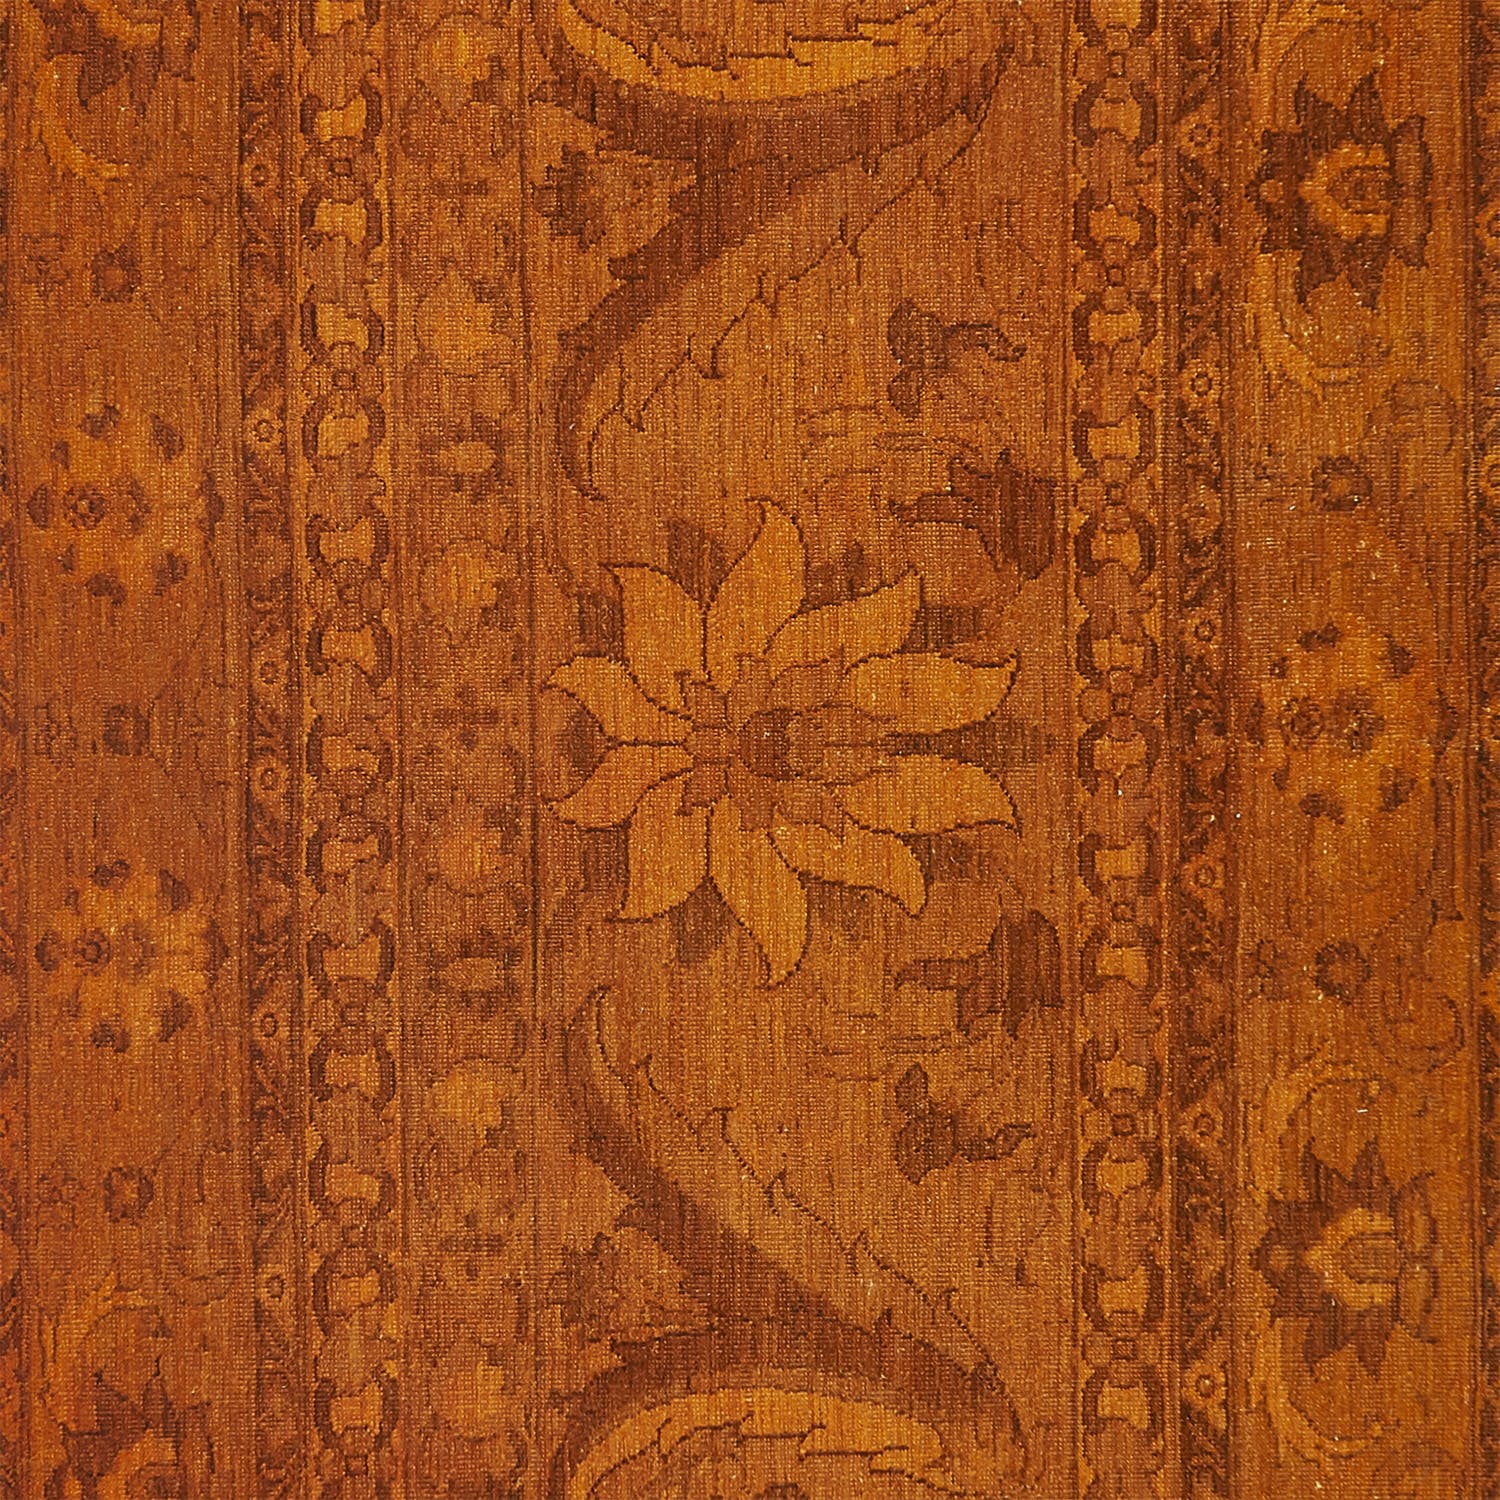 An ornate wooden panel with floral motifs and intricate patterns.